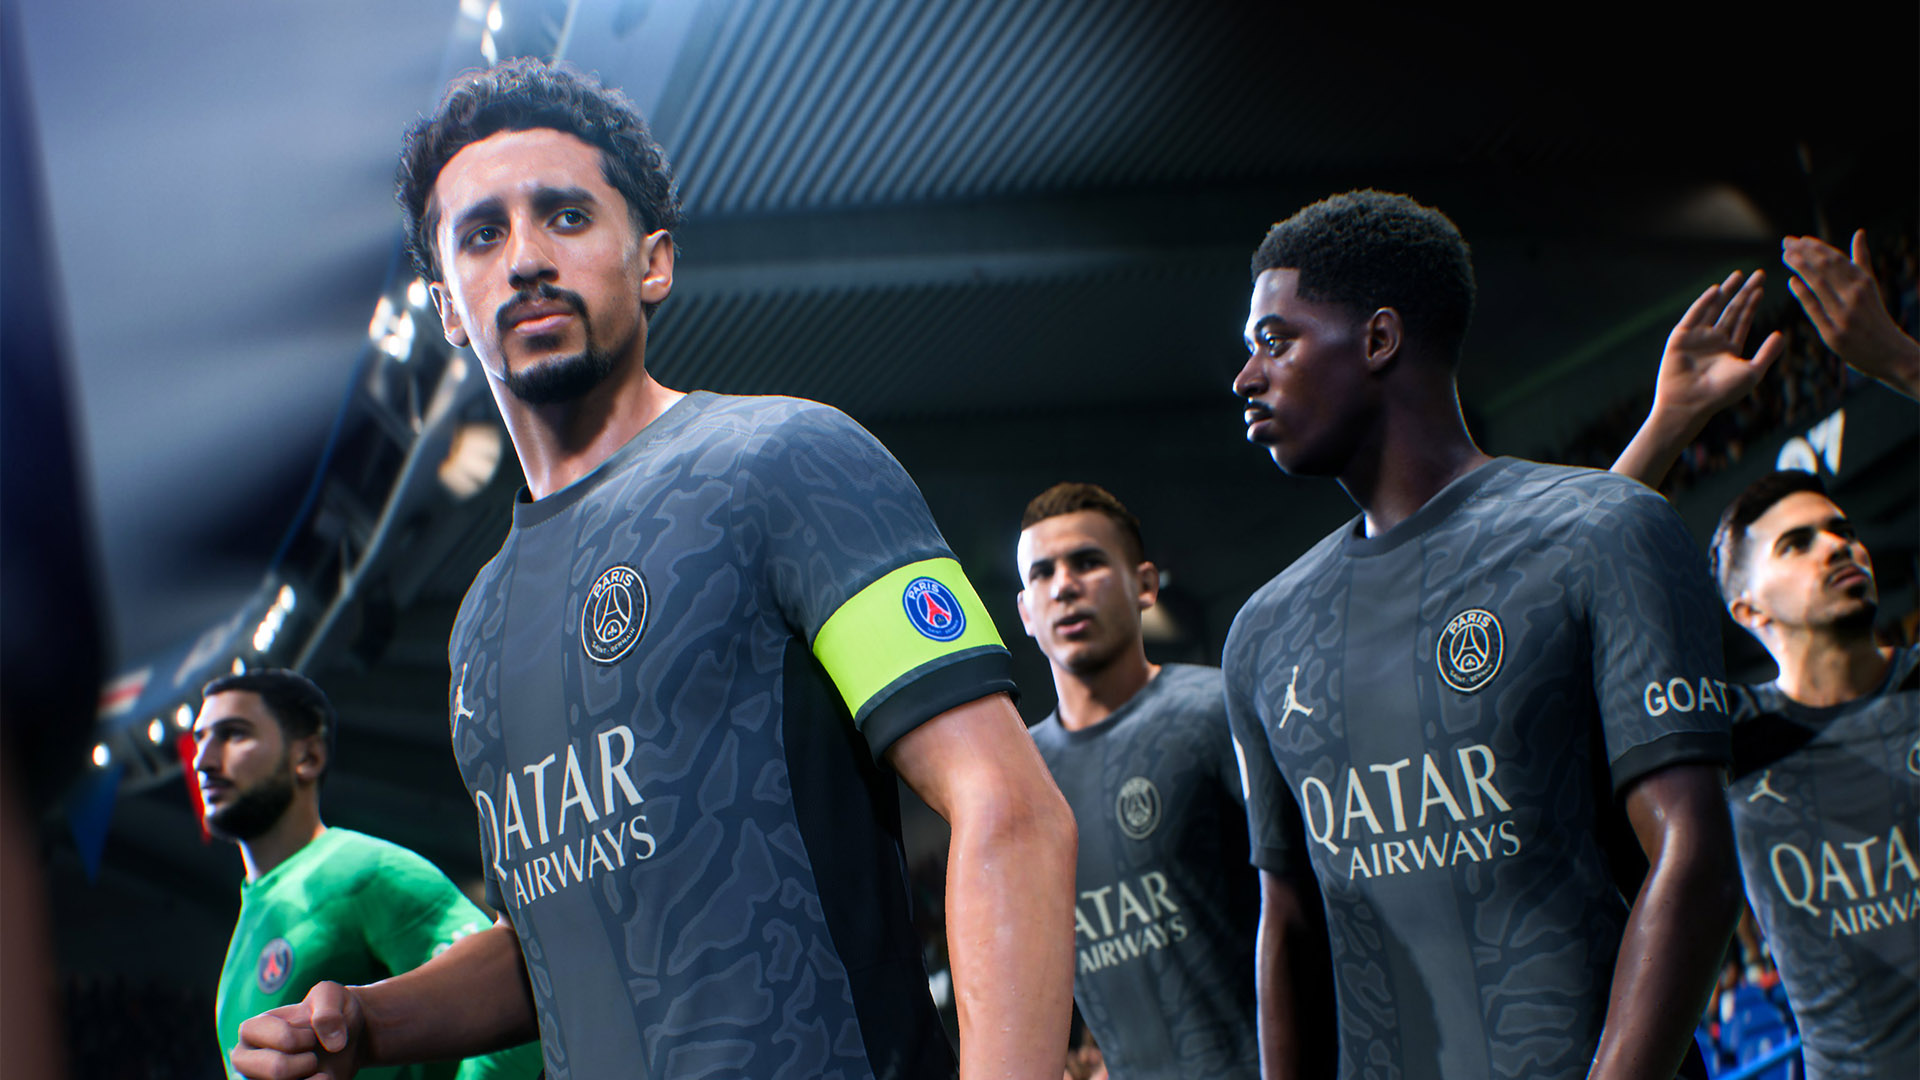 What Leagues Are In Ea Sports Fc 24?